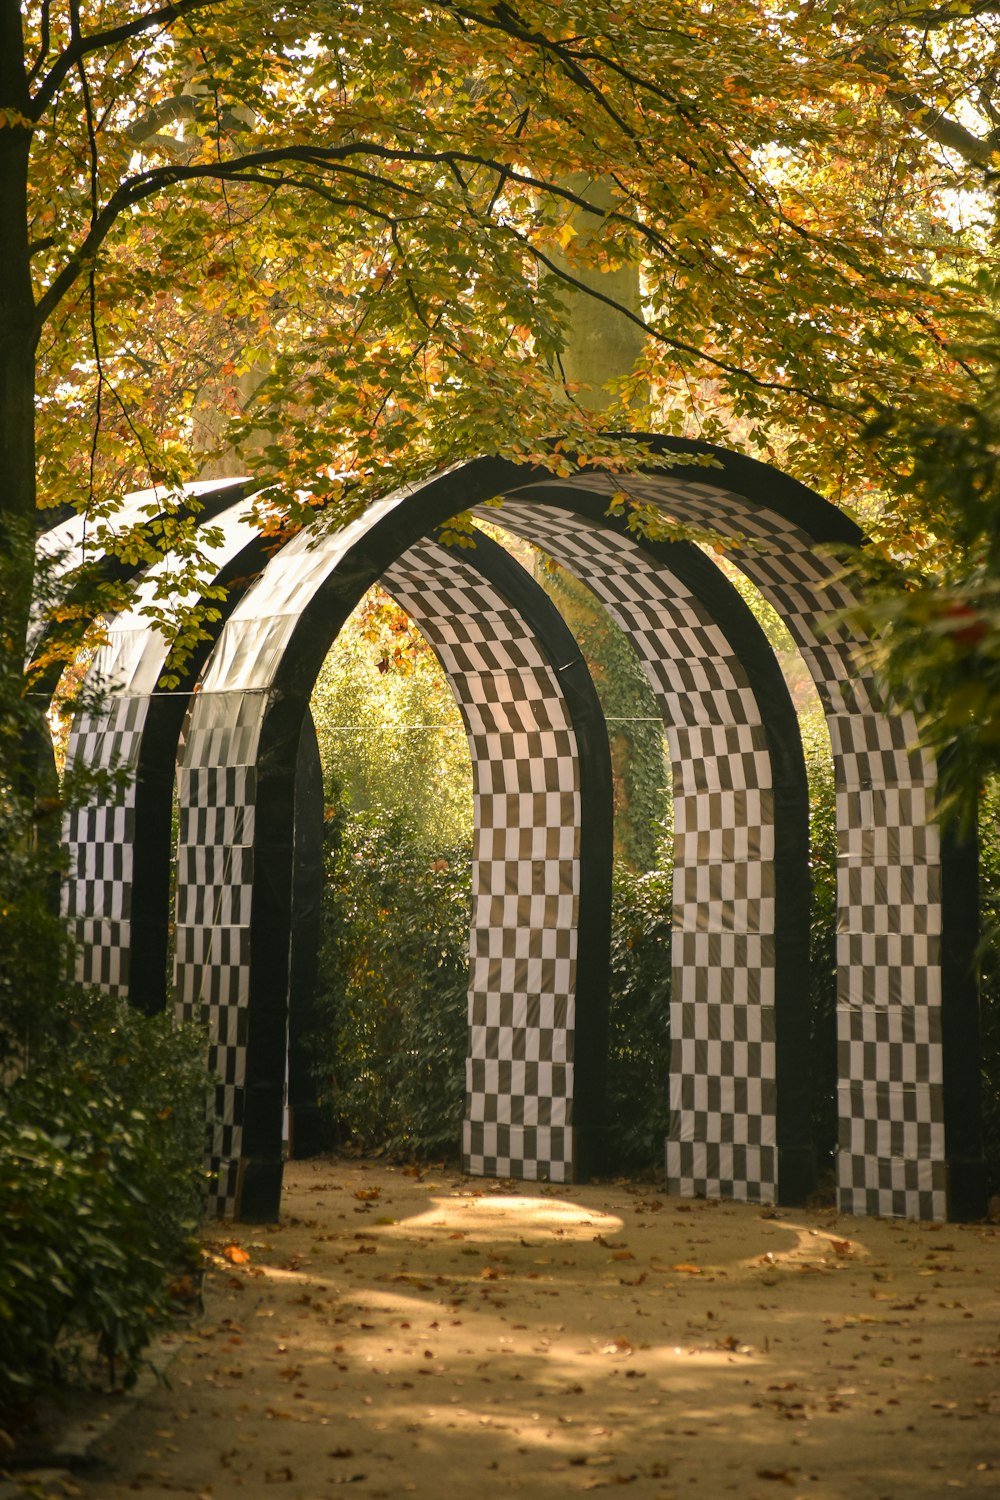 a black and white checkered arch in a park